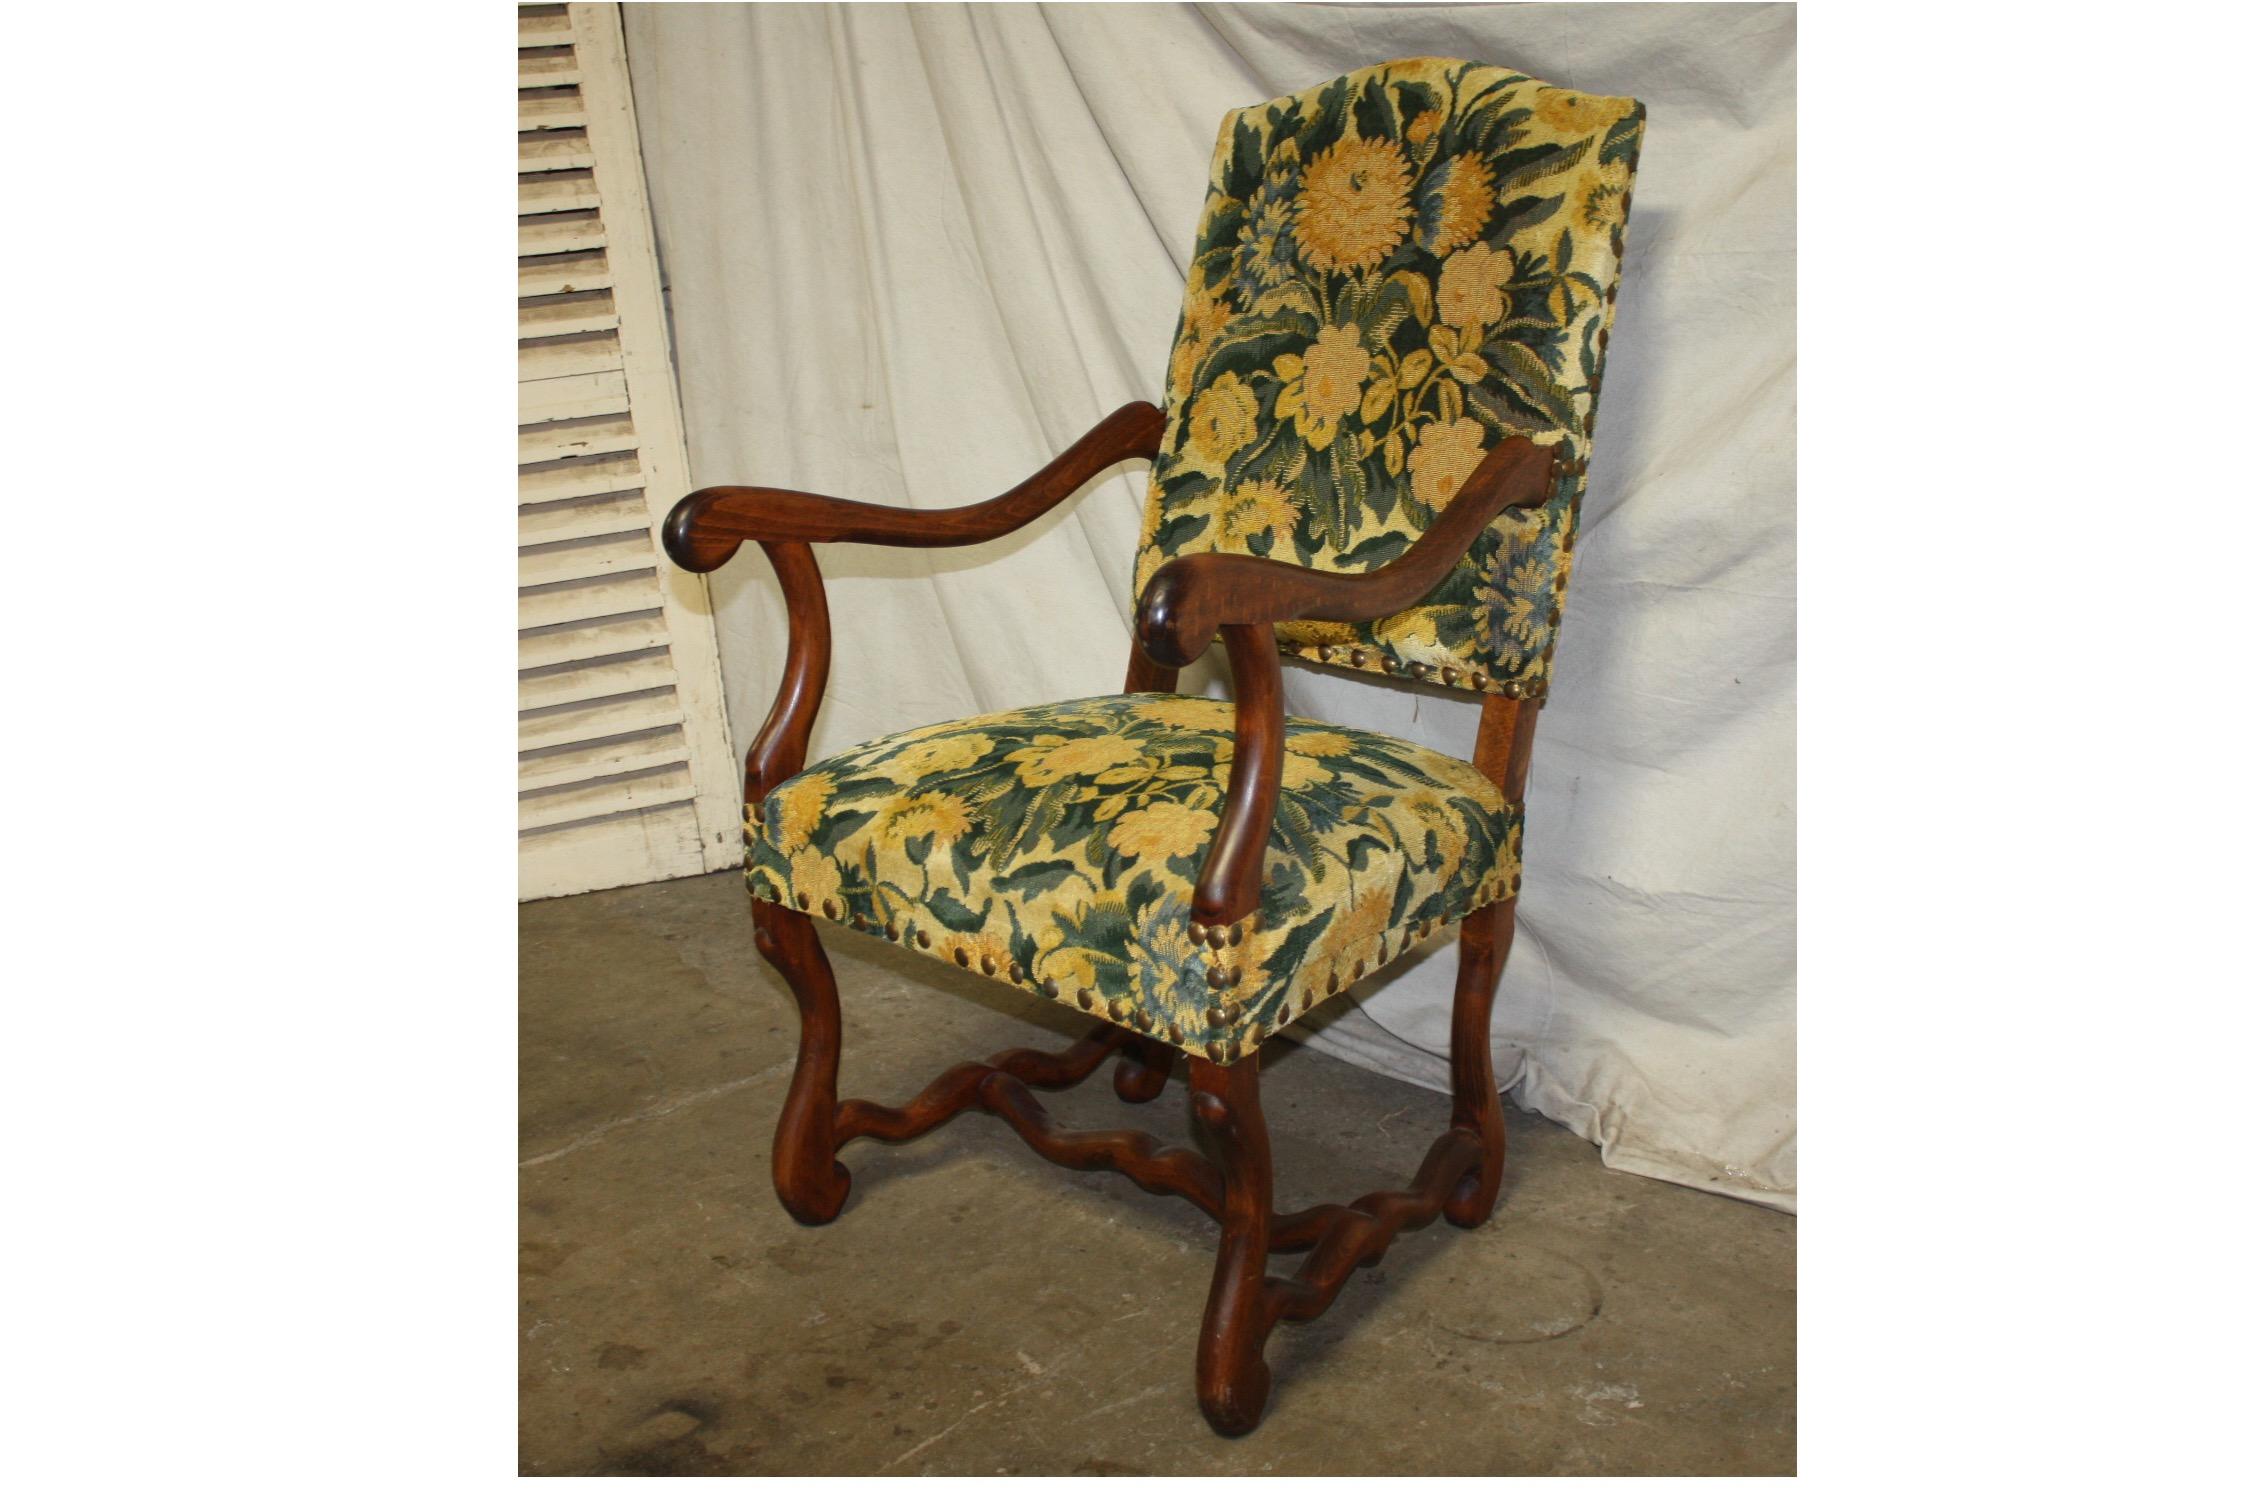 19th century French armchair.